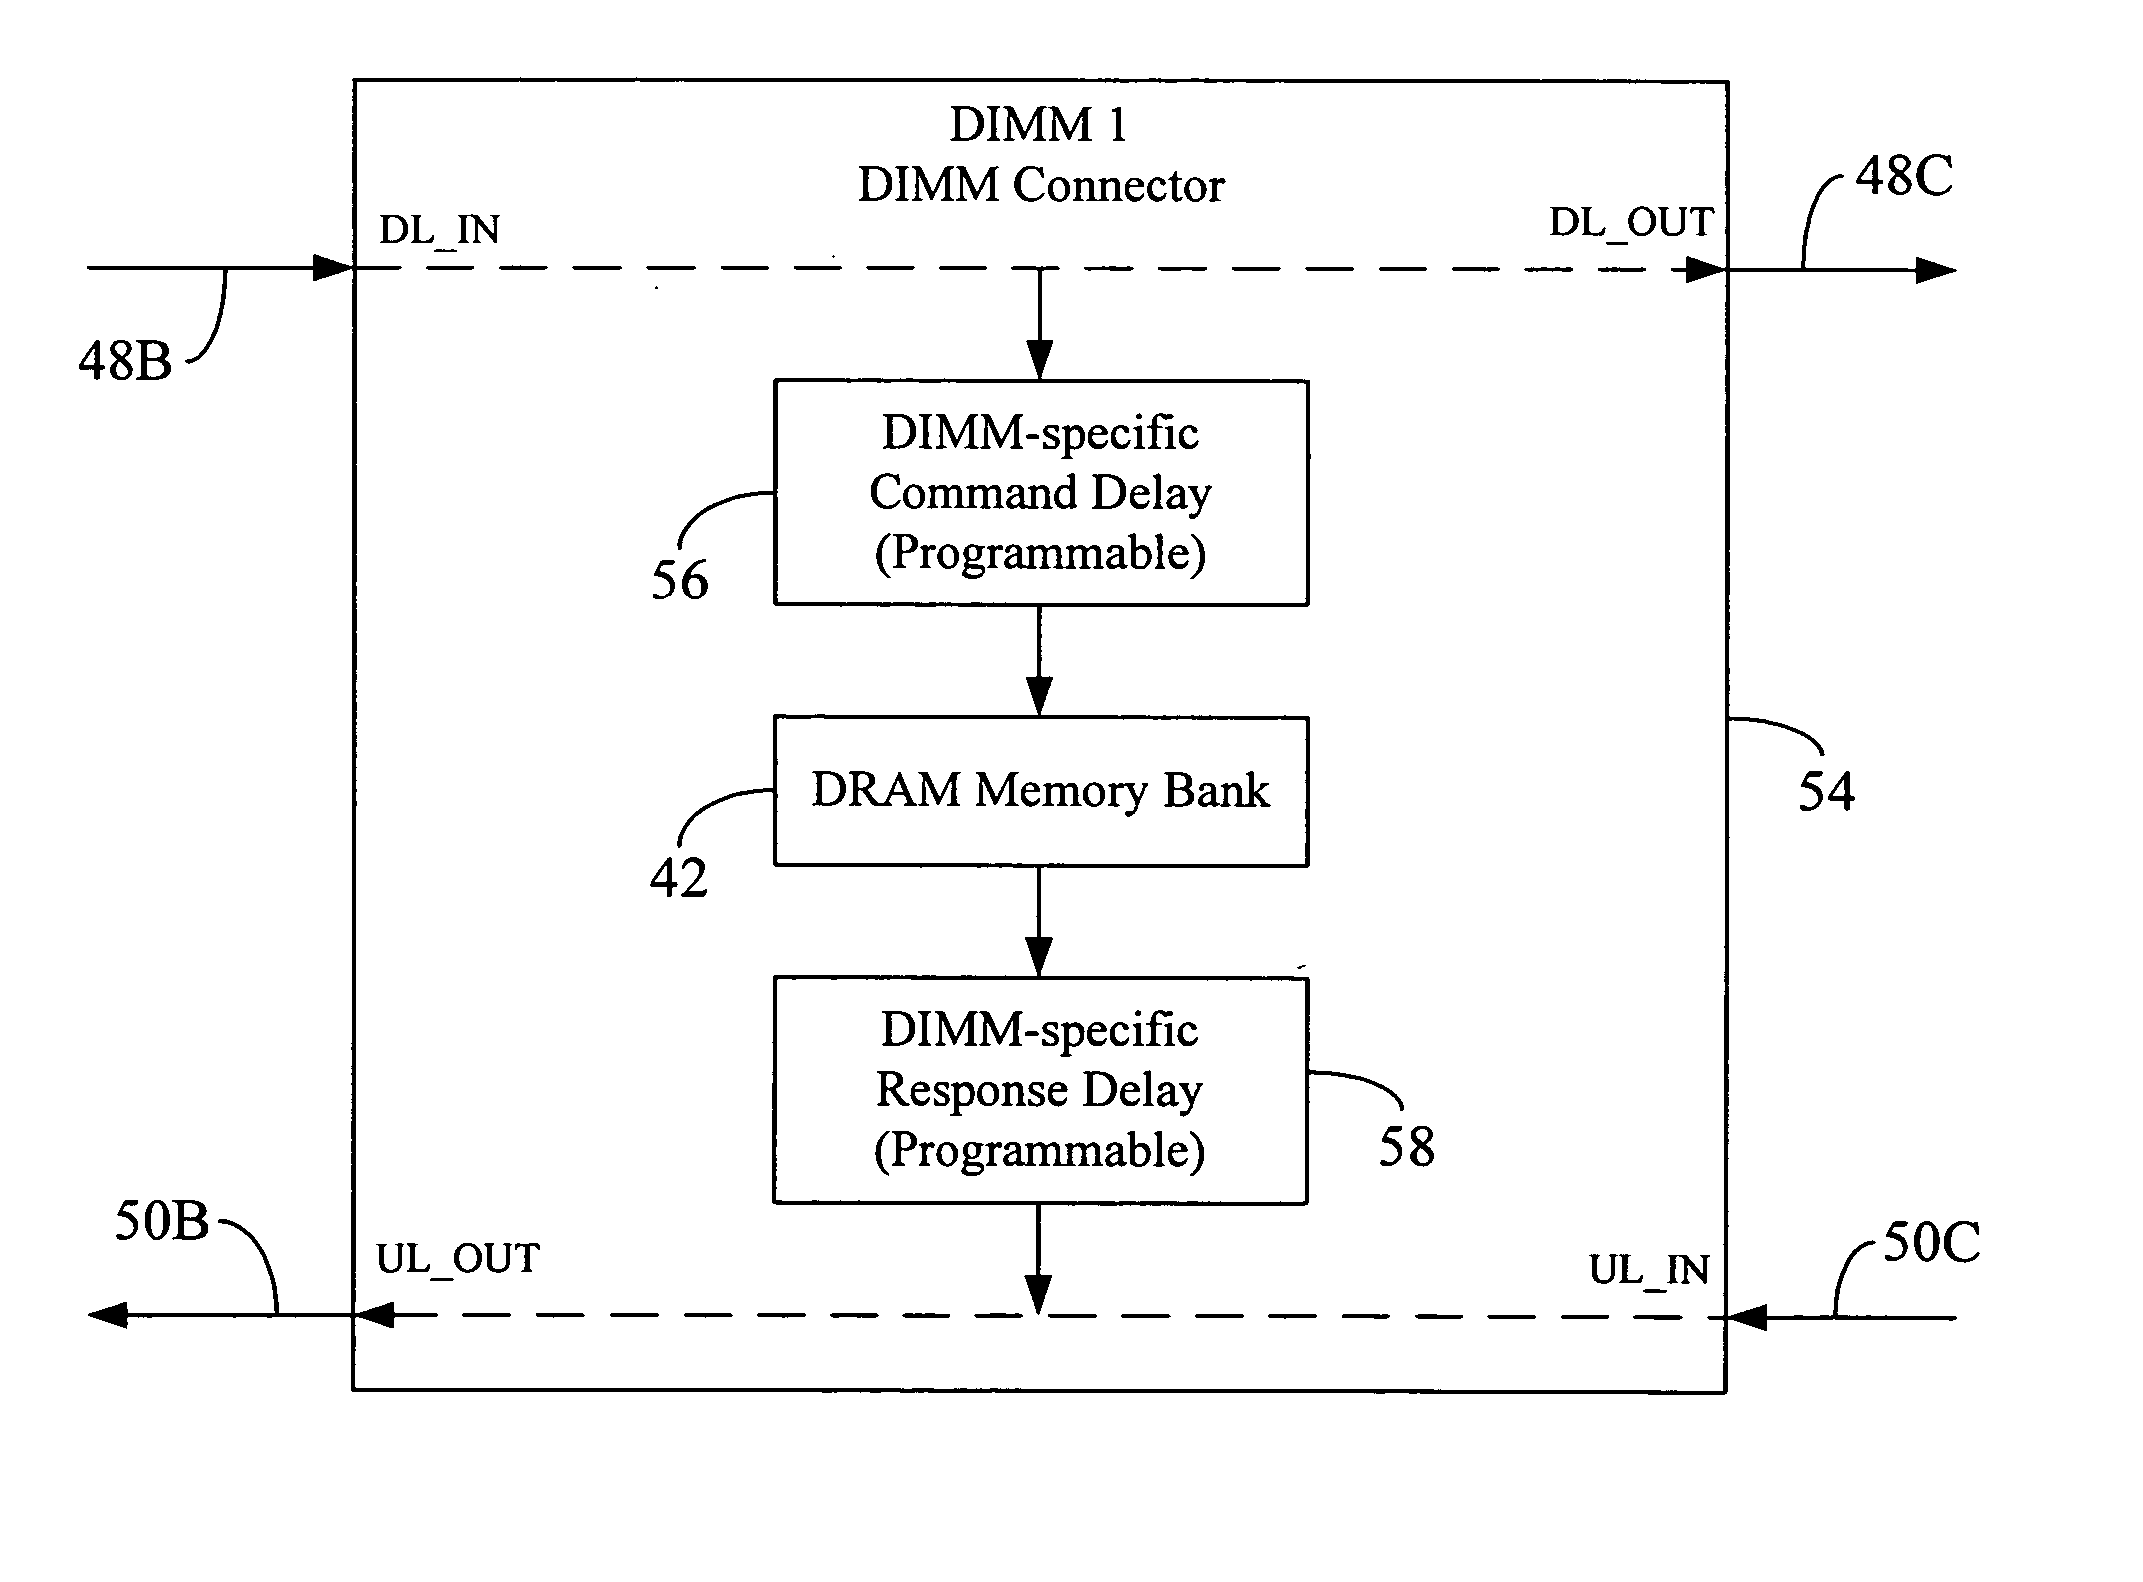 Memory command delay balancing in a daisy-chained memory topology